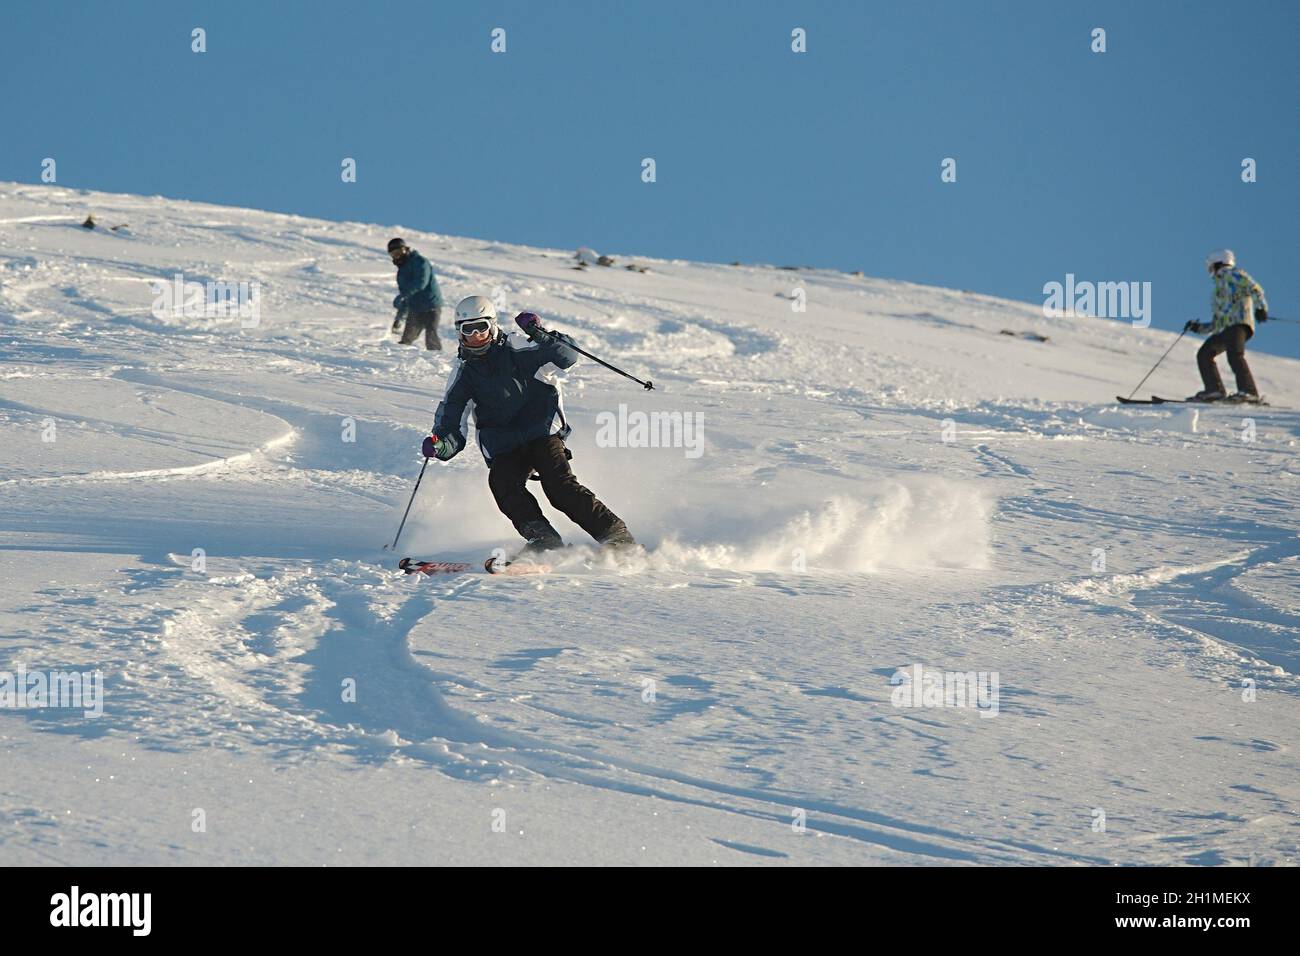 LES ORRES, FRANCE - CIRCA 2016: Young skier coming down fast in fresh powder snow off-piste. Stock Photo